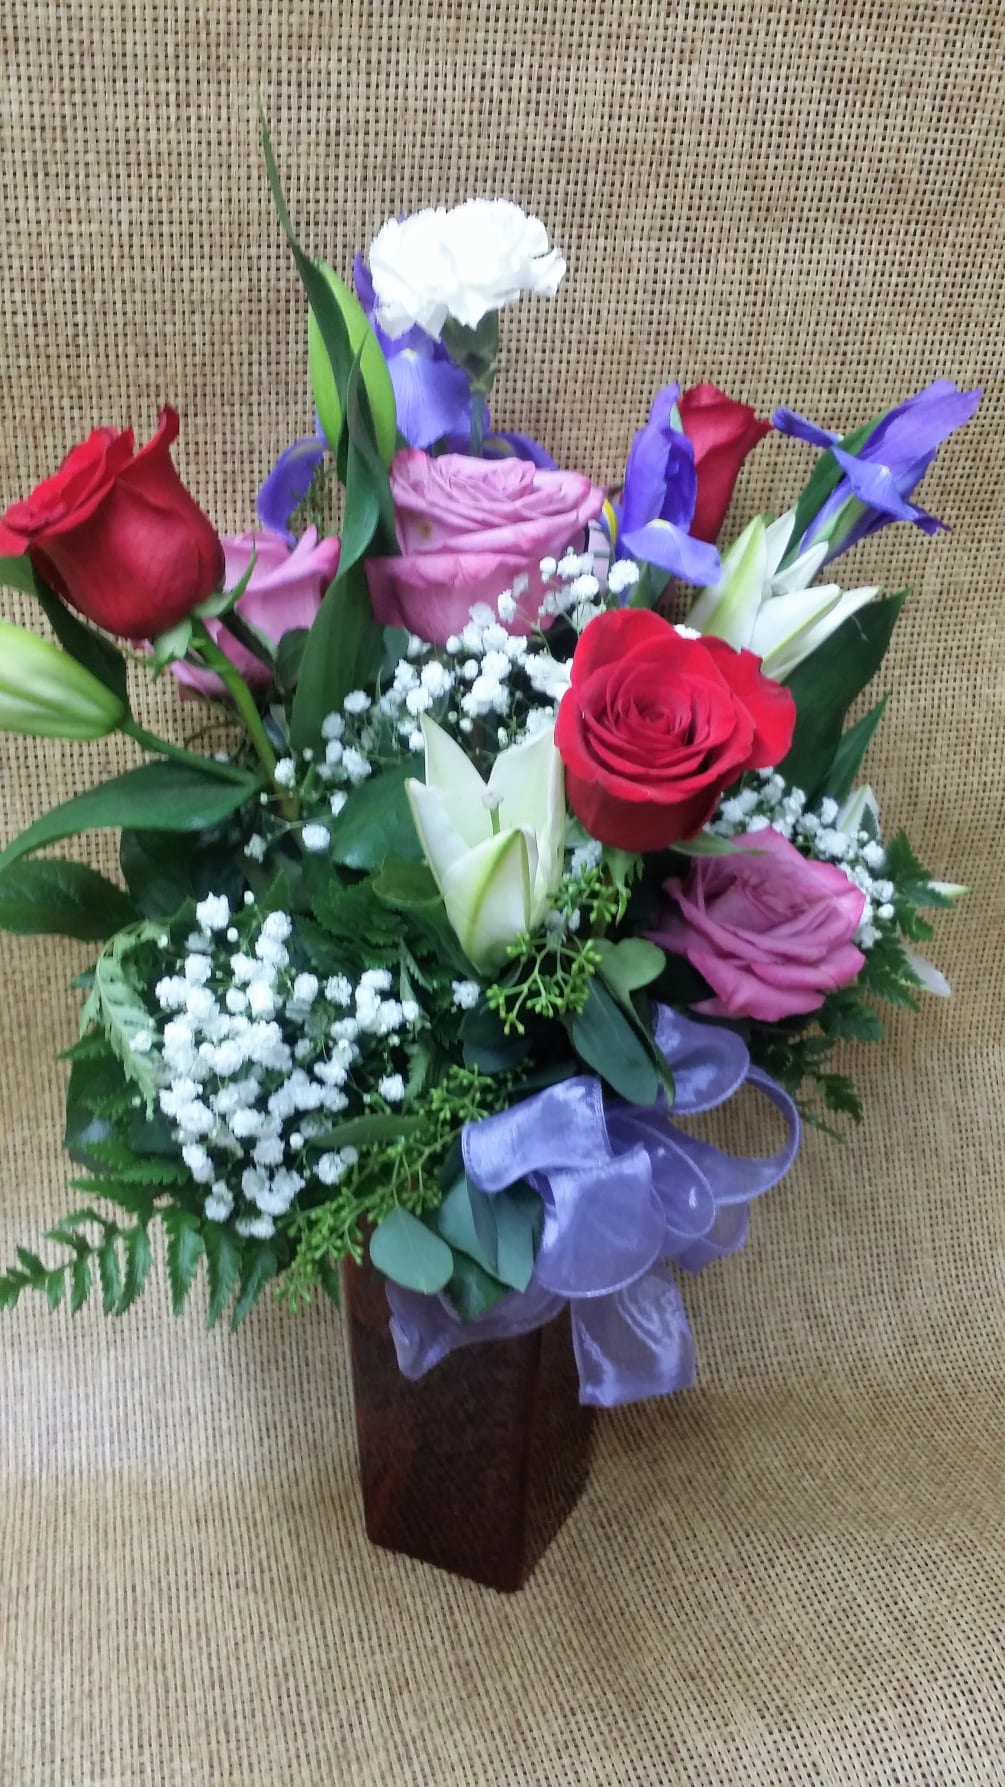 Mixed roses, blue Asian iris and white lilies, accented by sprigs of